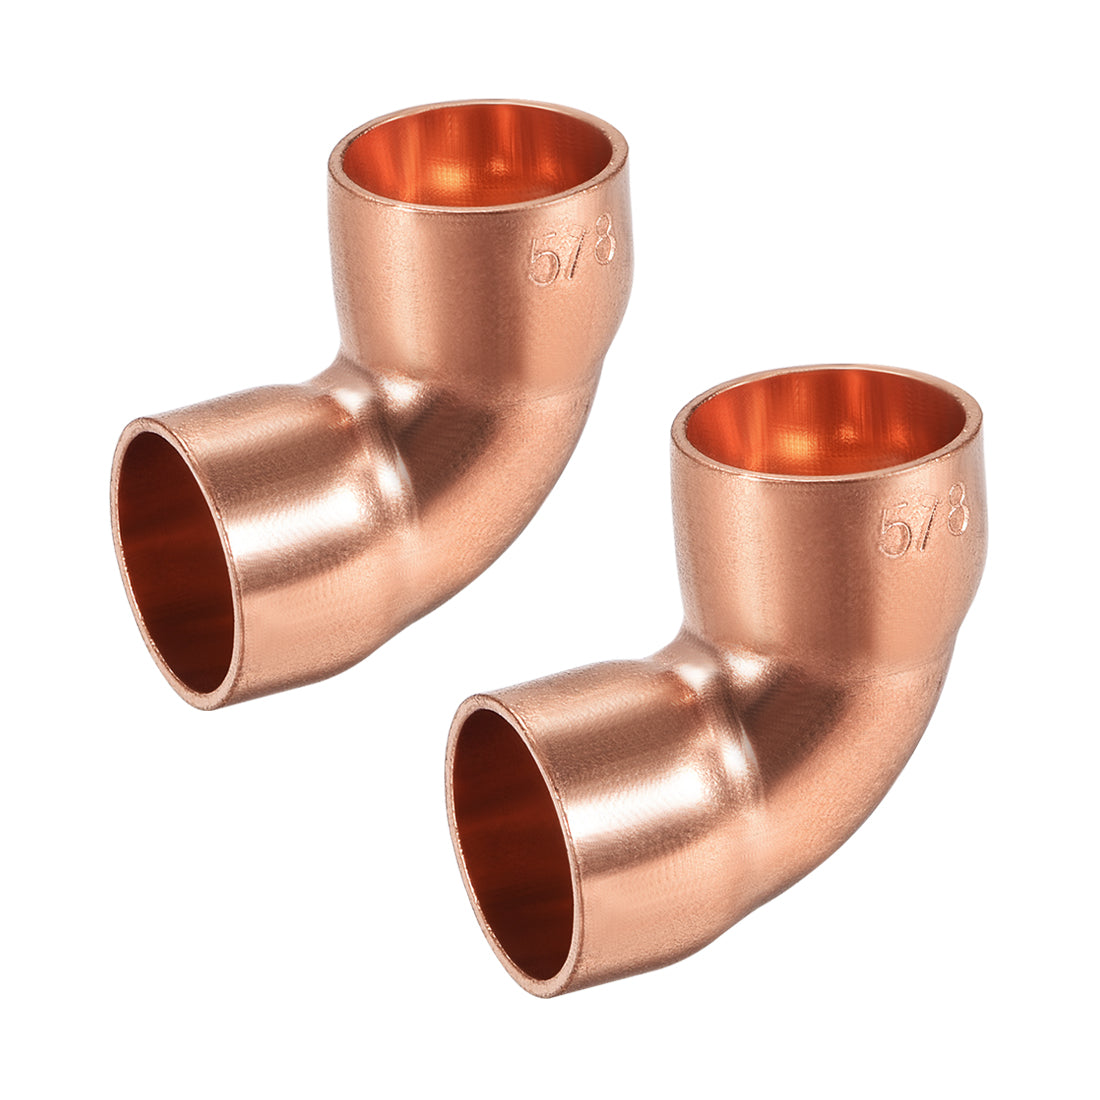 uxcell Uxcell 16mm ID Solder Ring Elbow 90 Degree Copper Pipe Fitting 1mm Thick 2pcs